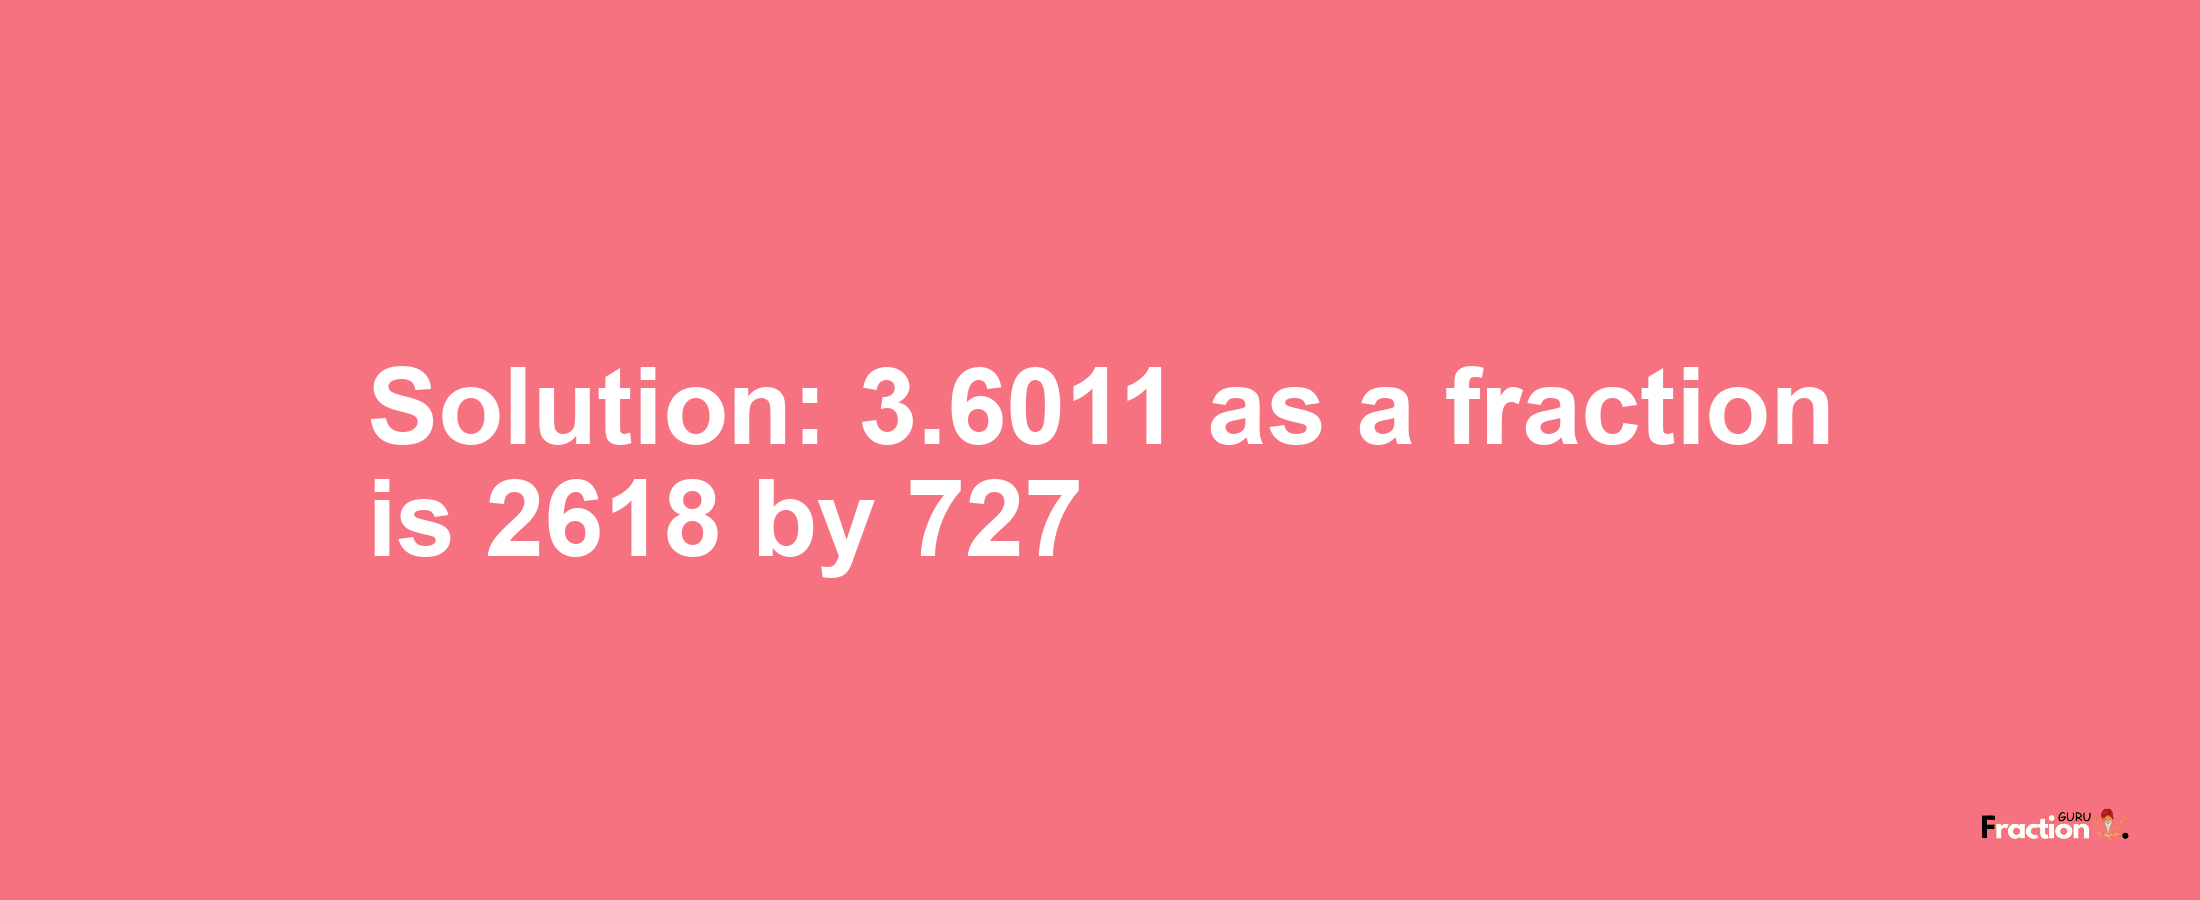 Solution:3.6011 as a fraction is 2618/727